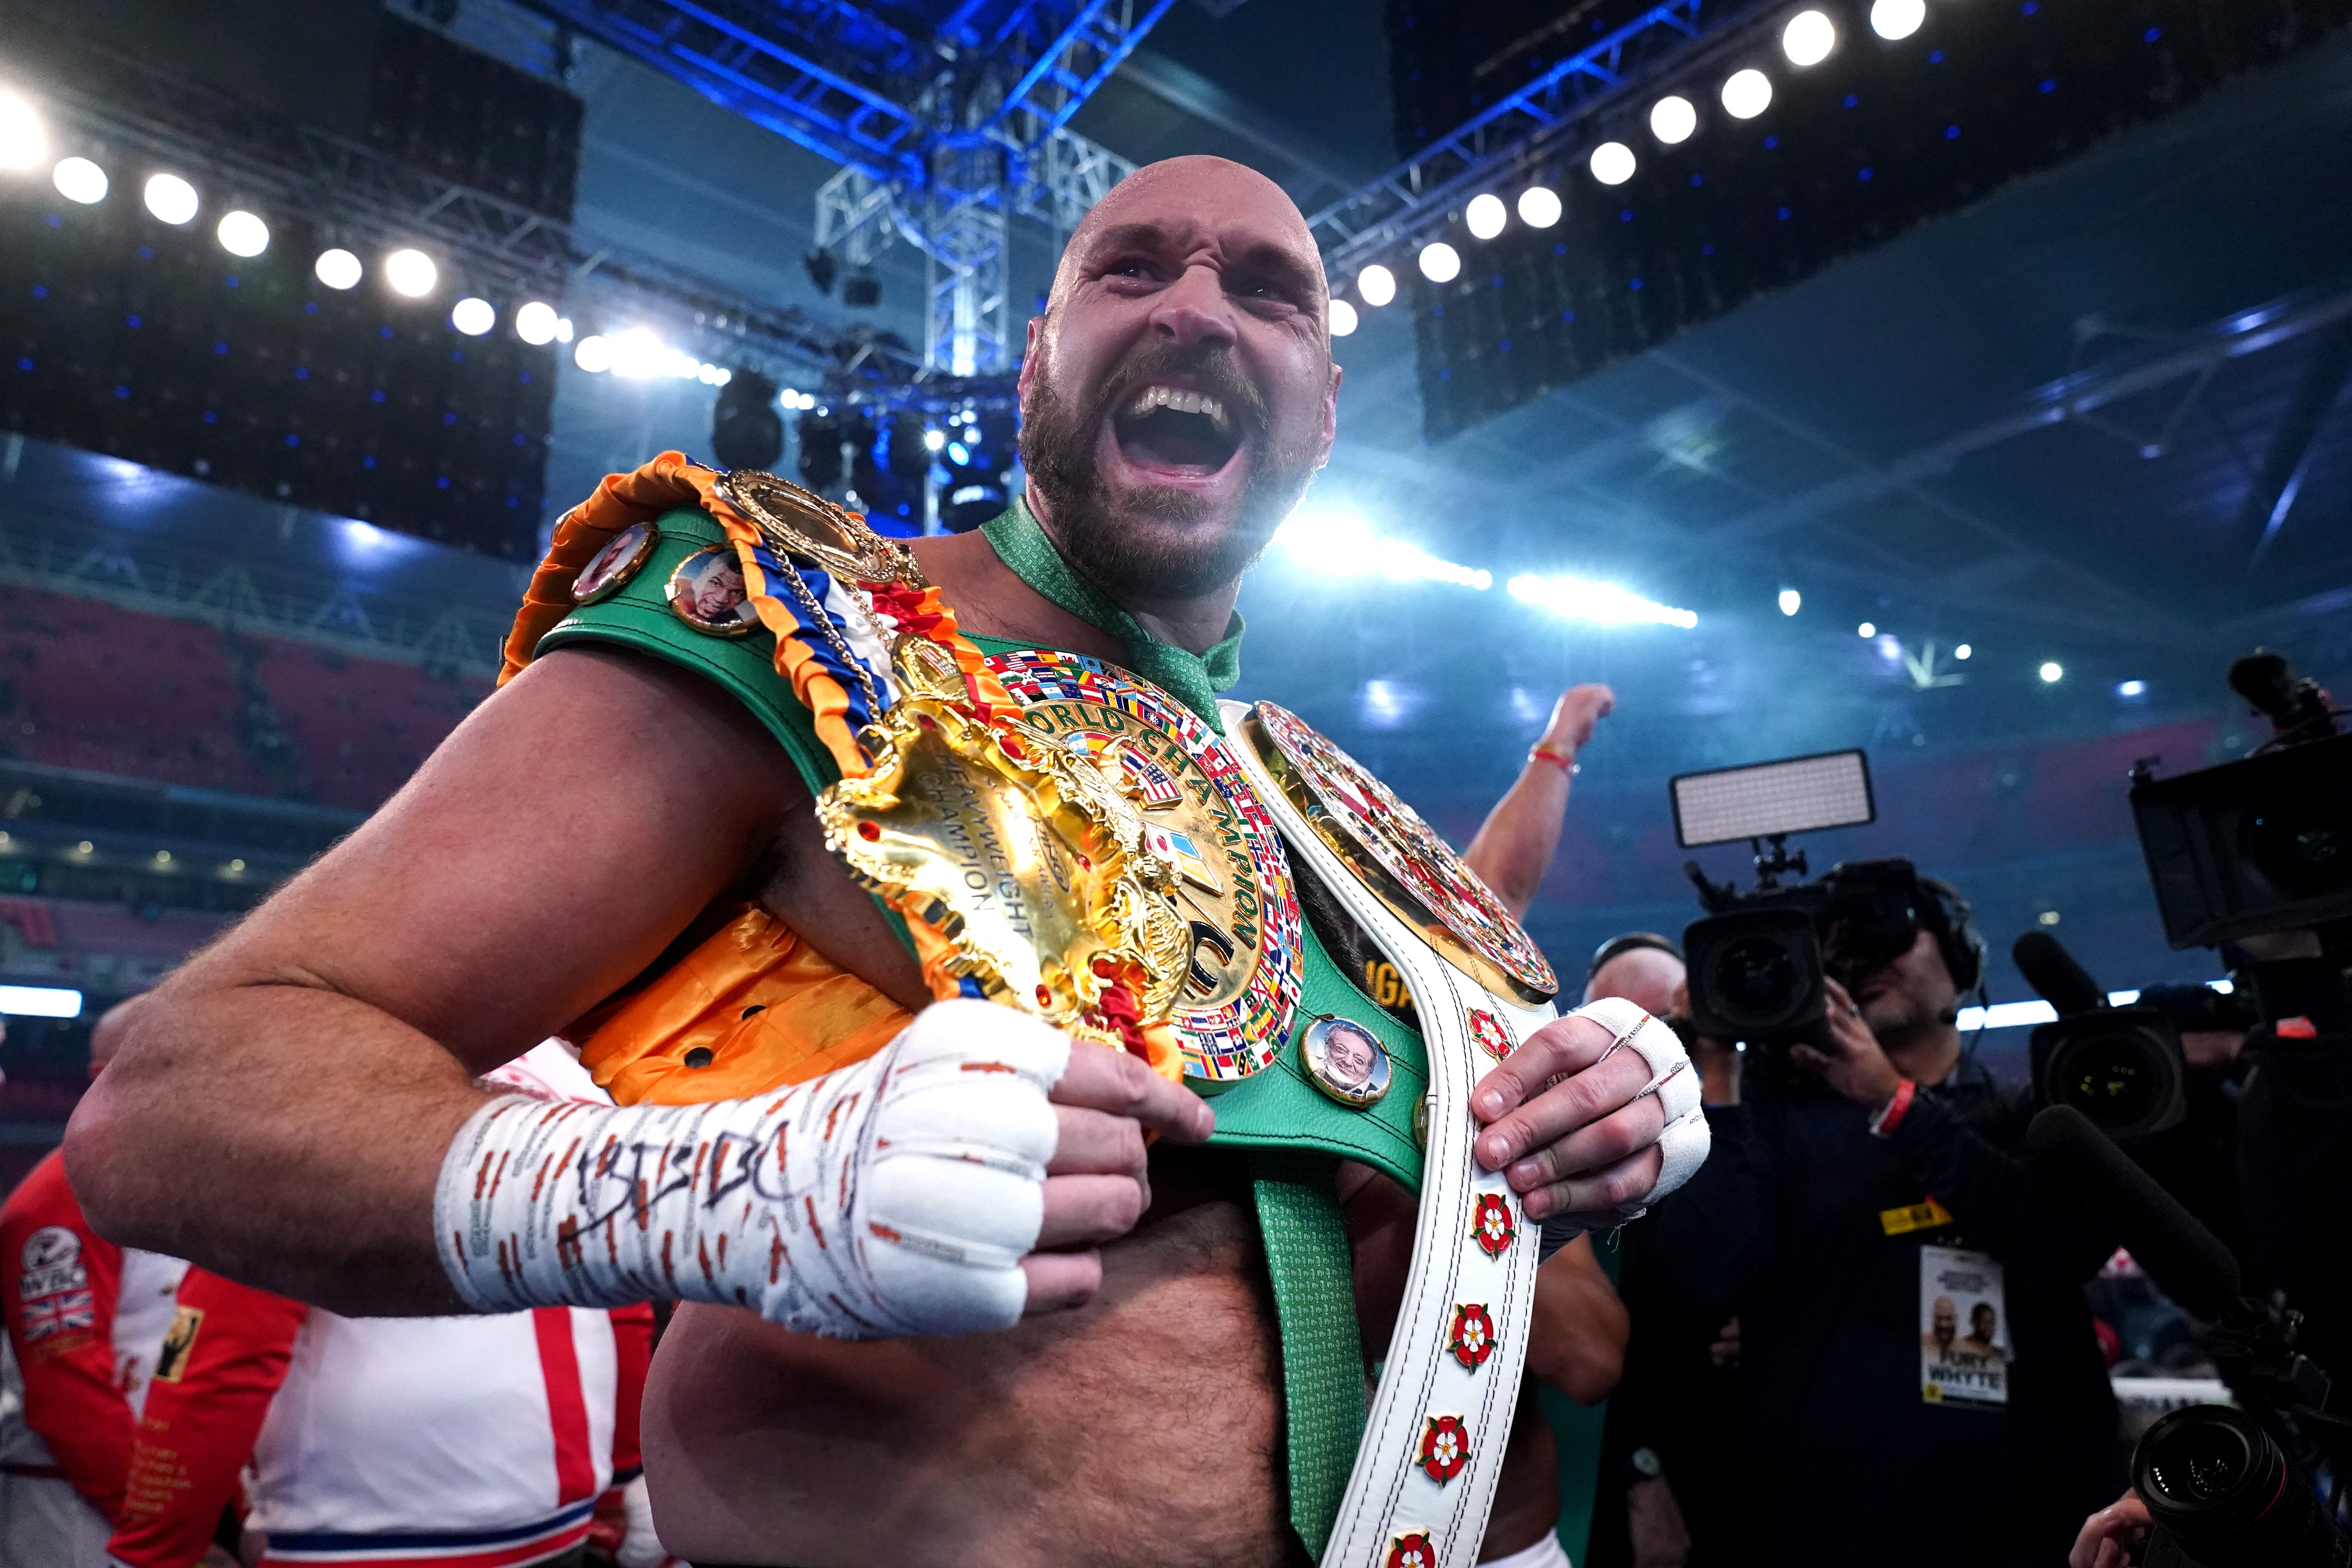 Tyson Fury following his victory over Dillian Whyte at Wembley on Saturday (Nick Potts/PA).